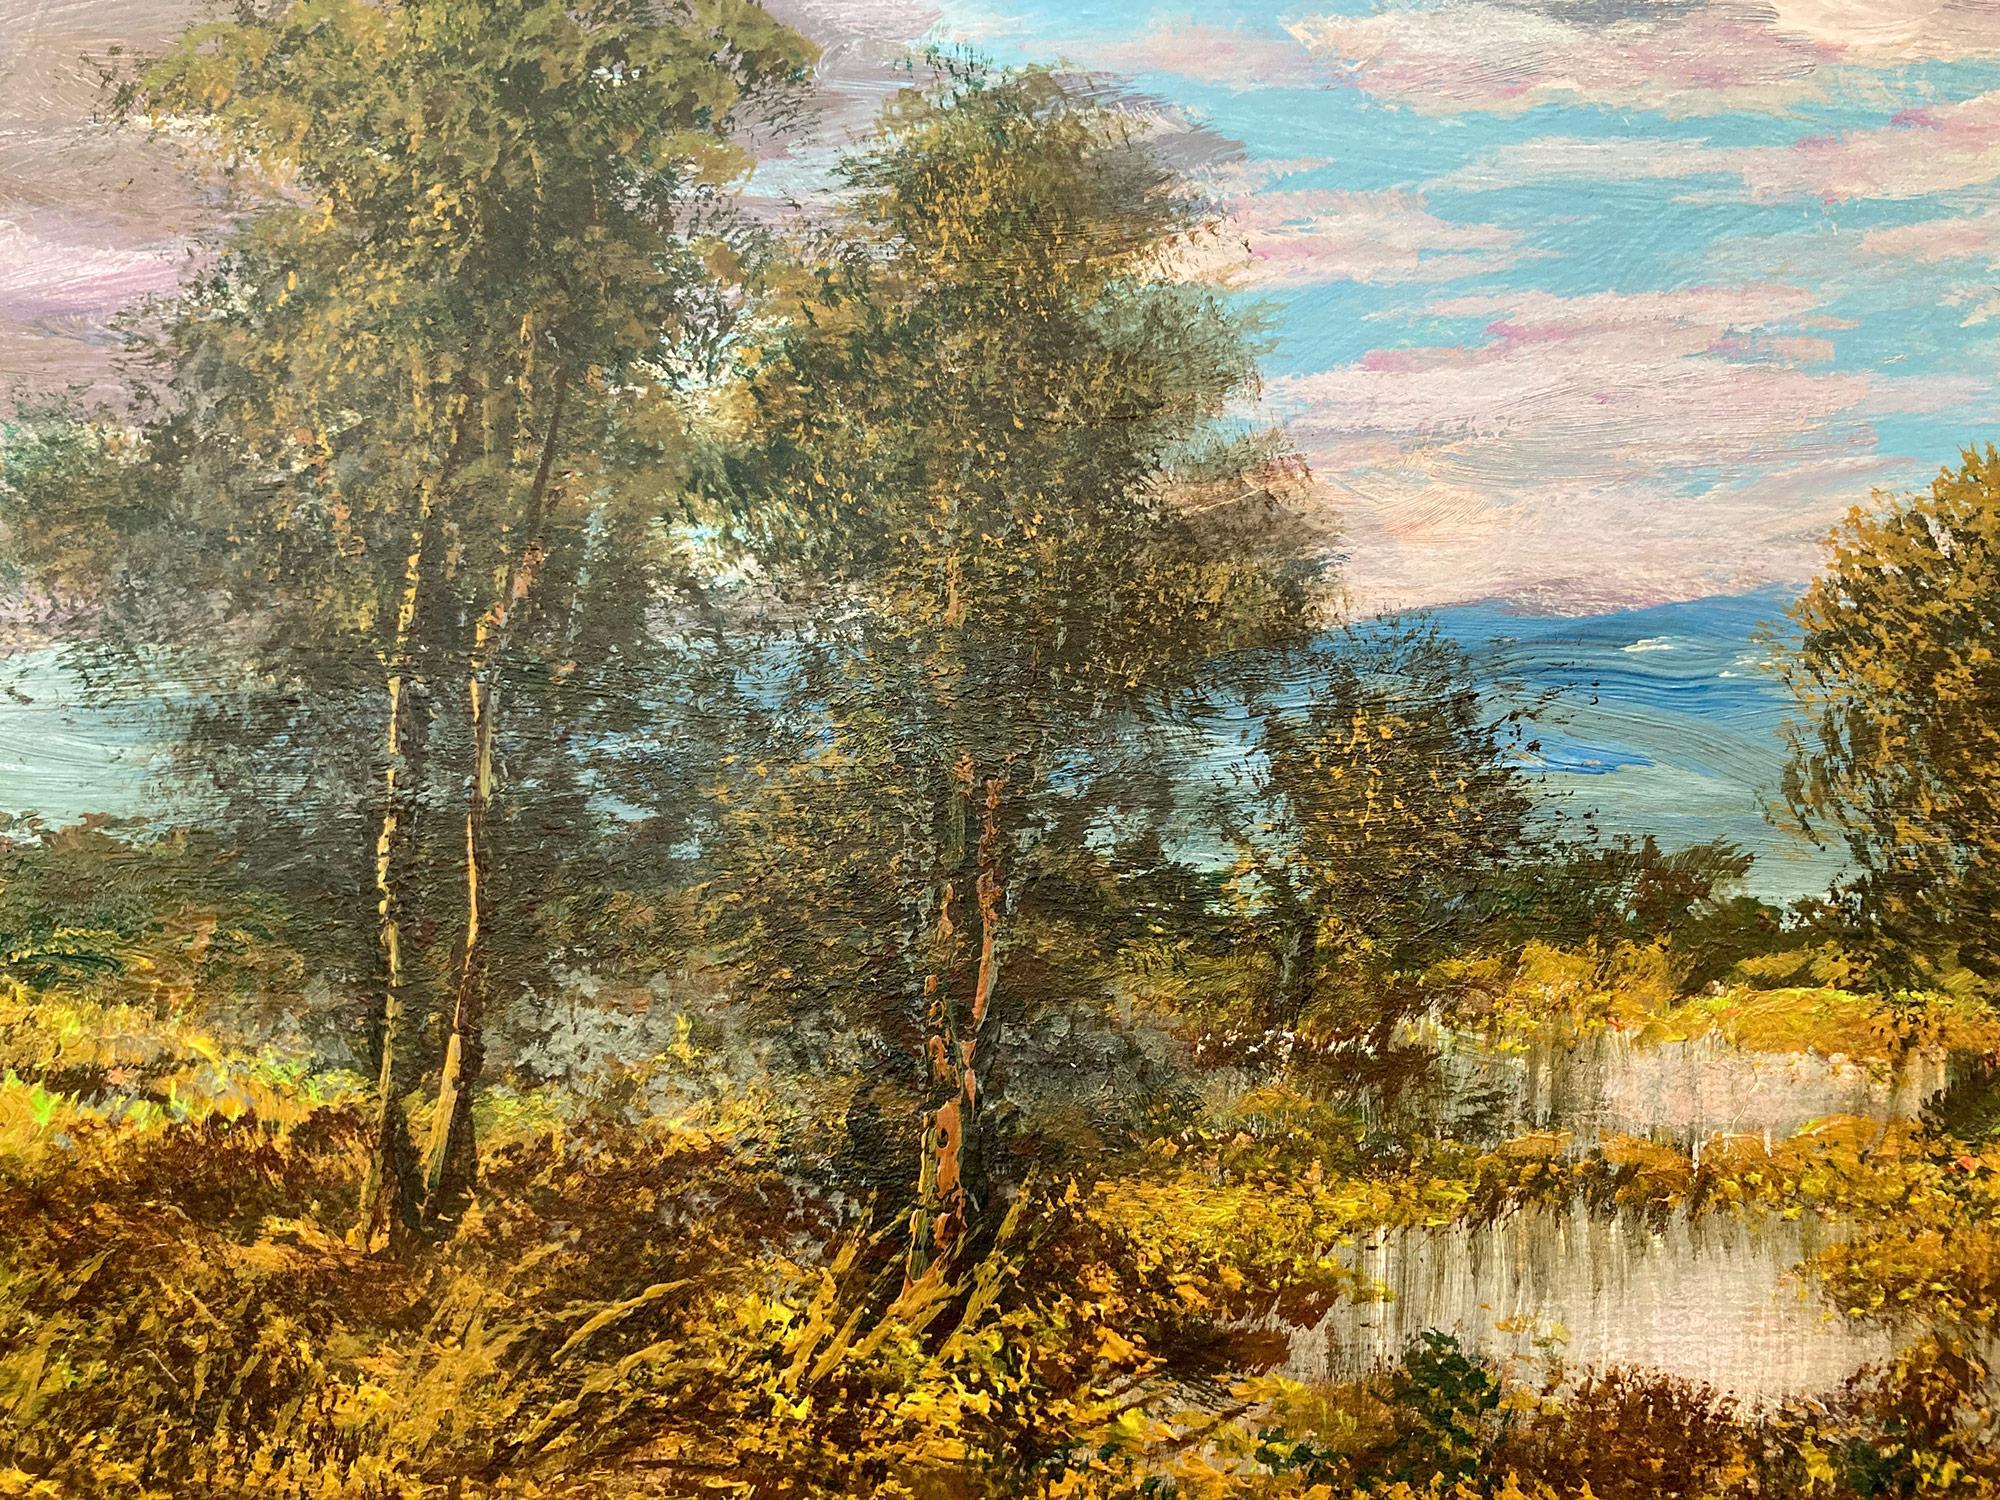 A fine depiction of an autumn season landscape of Wetlands with a beautiful reflection of sunlight hitting the water. For this wonderful depiction, Nemethy uses a fine technique which depicts the trees and colorful skyline with much grace and